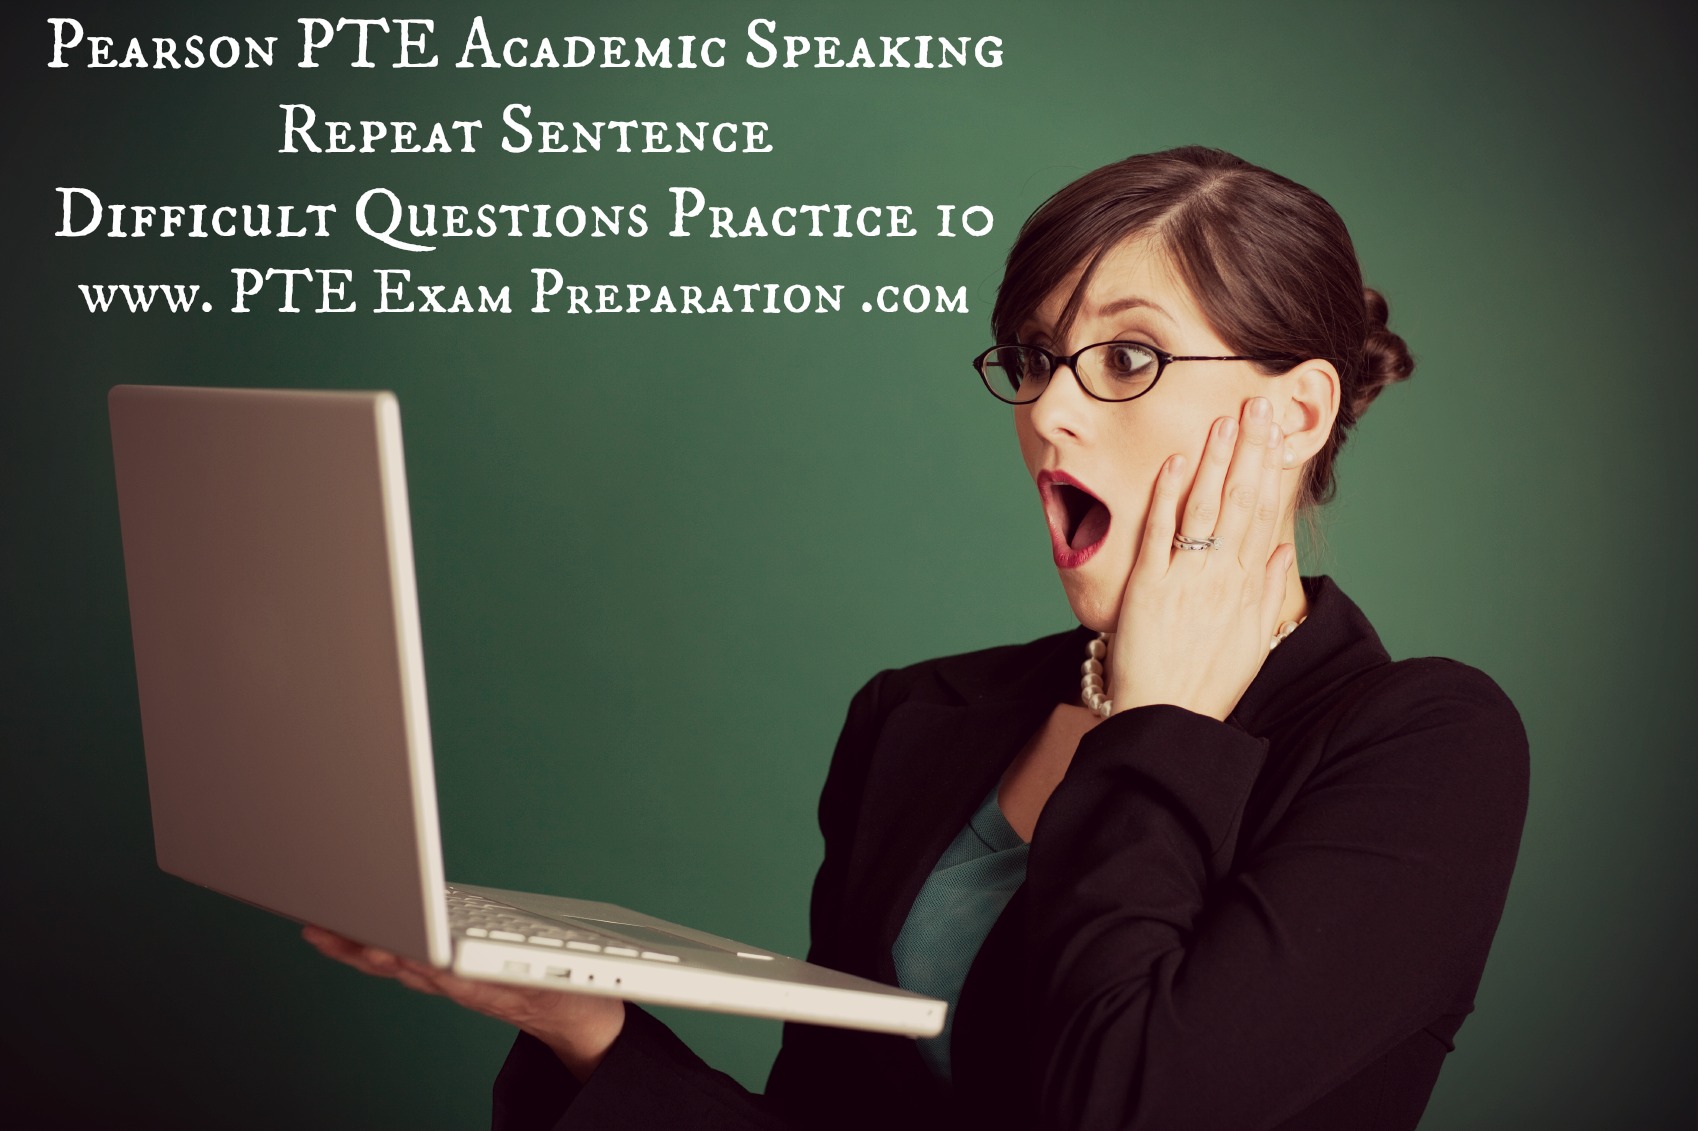 Pearson PTE Academic Speaking Repeat Sentence Difficult Questions Practice 10